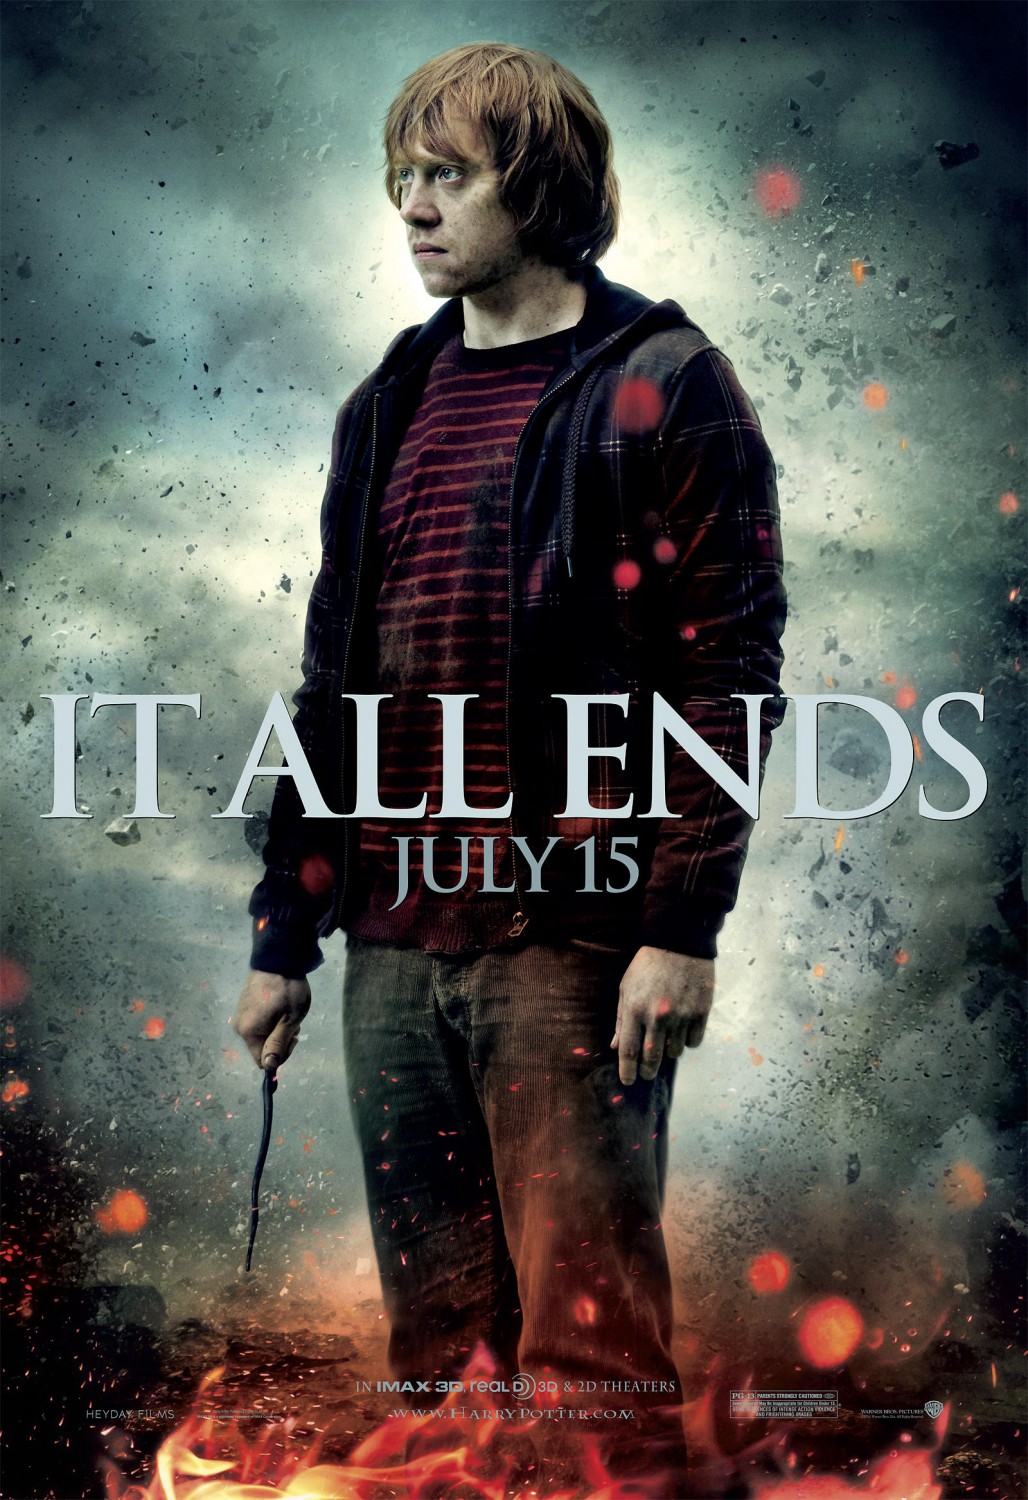 Extra Large Movie Poster Image for Harry Potter and the Deathly Hallows: Part 2 (#27 of 28)